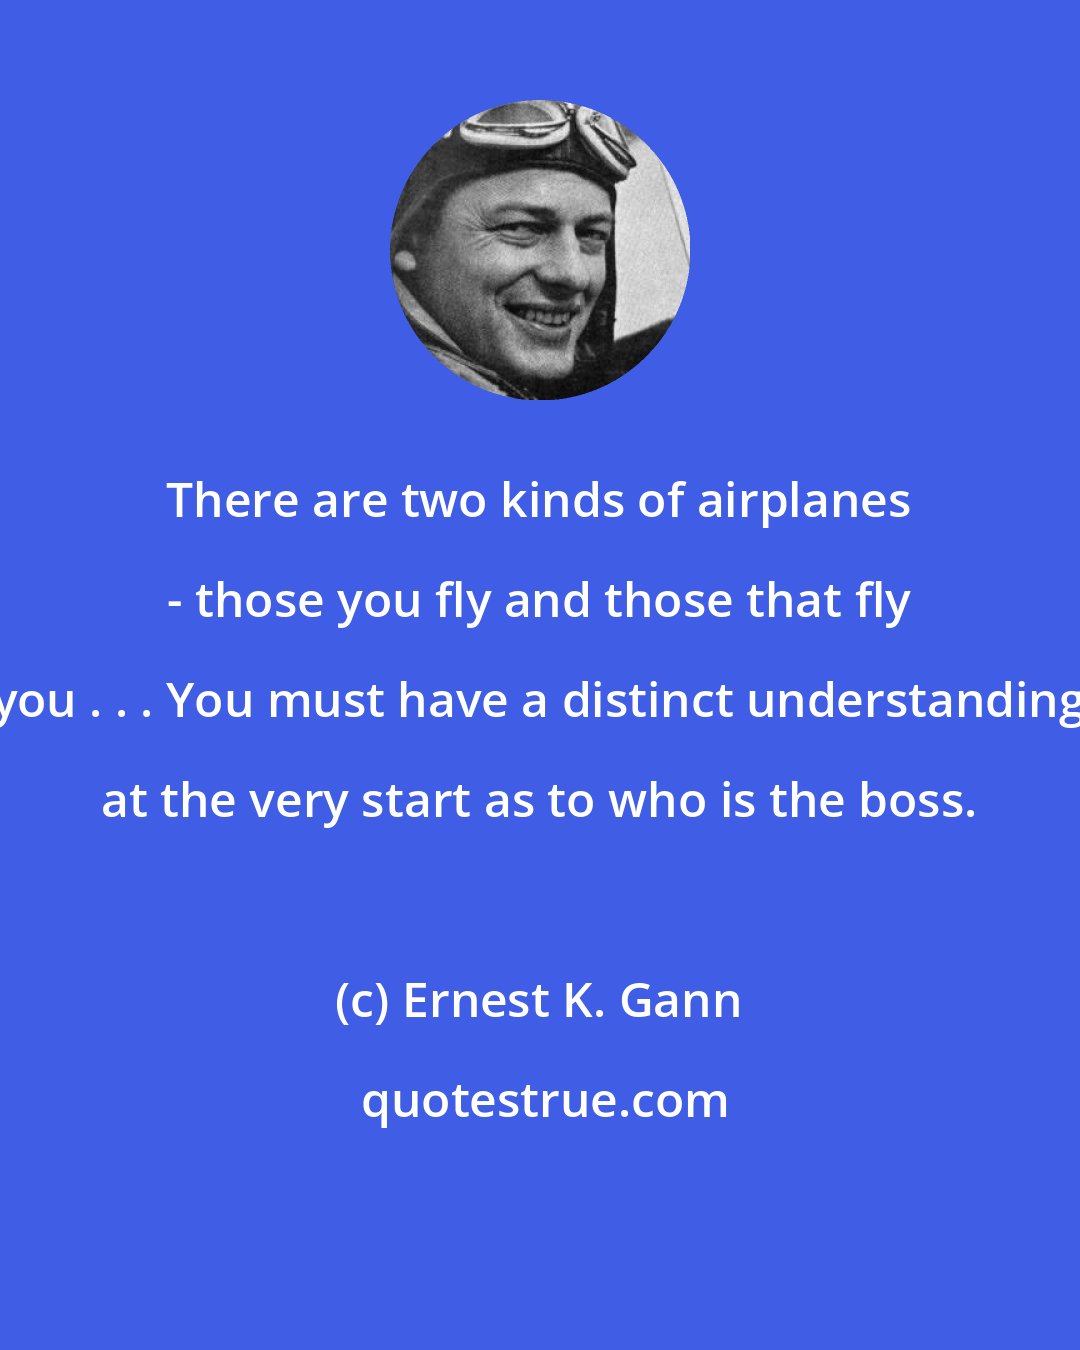 Ernest K. Gann: There are two kinds of airplanes - those you fly and those that fly you . . . You must have a distinct understanding at the very start as to who is the boss.